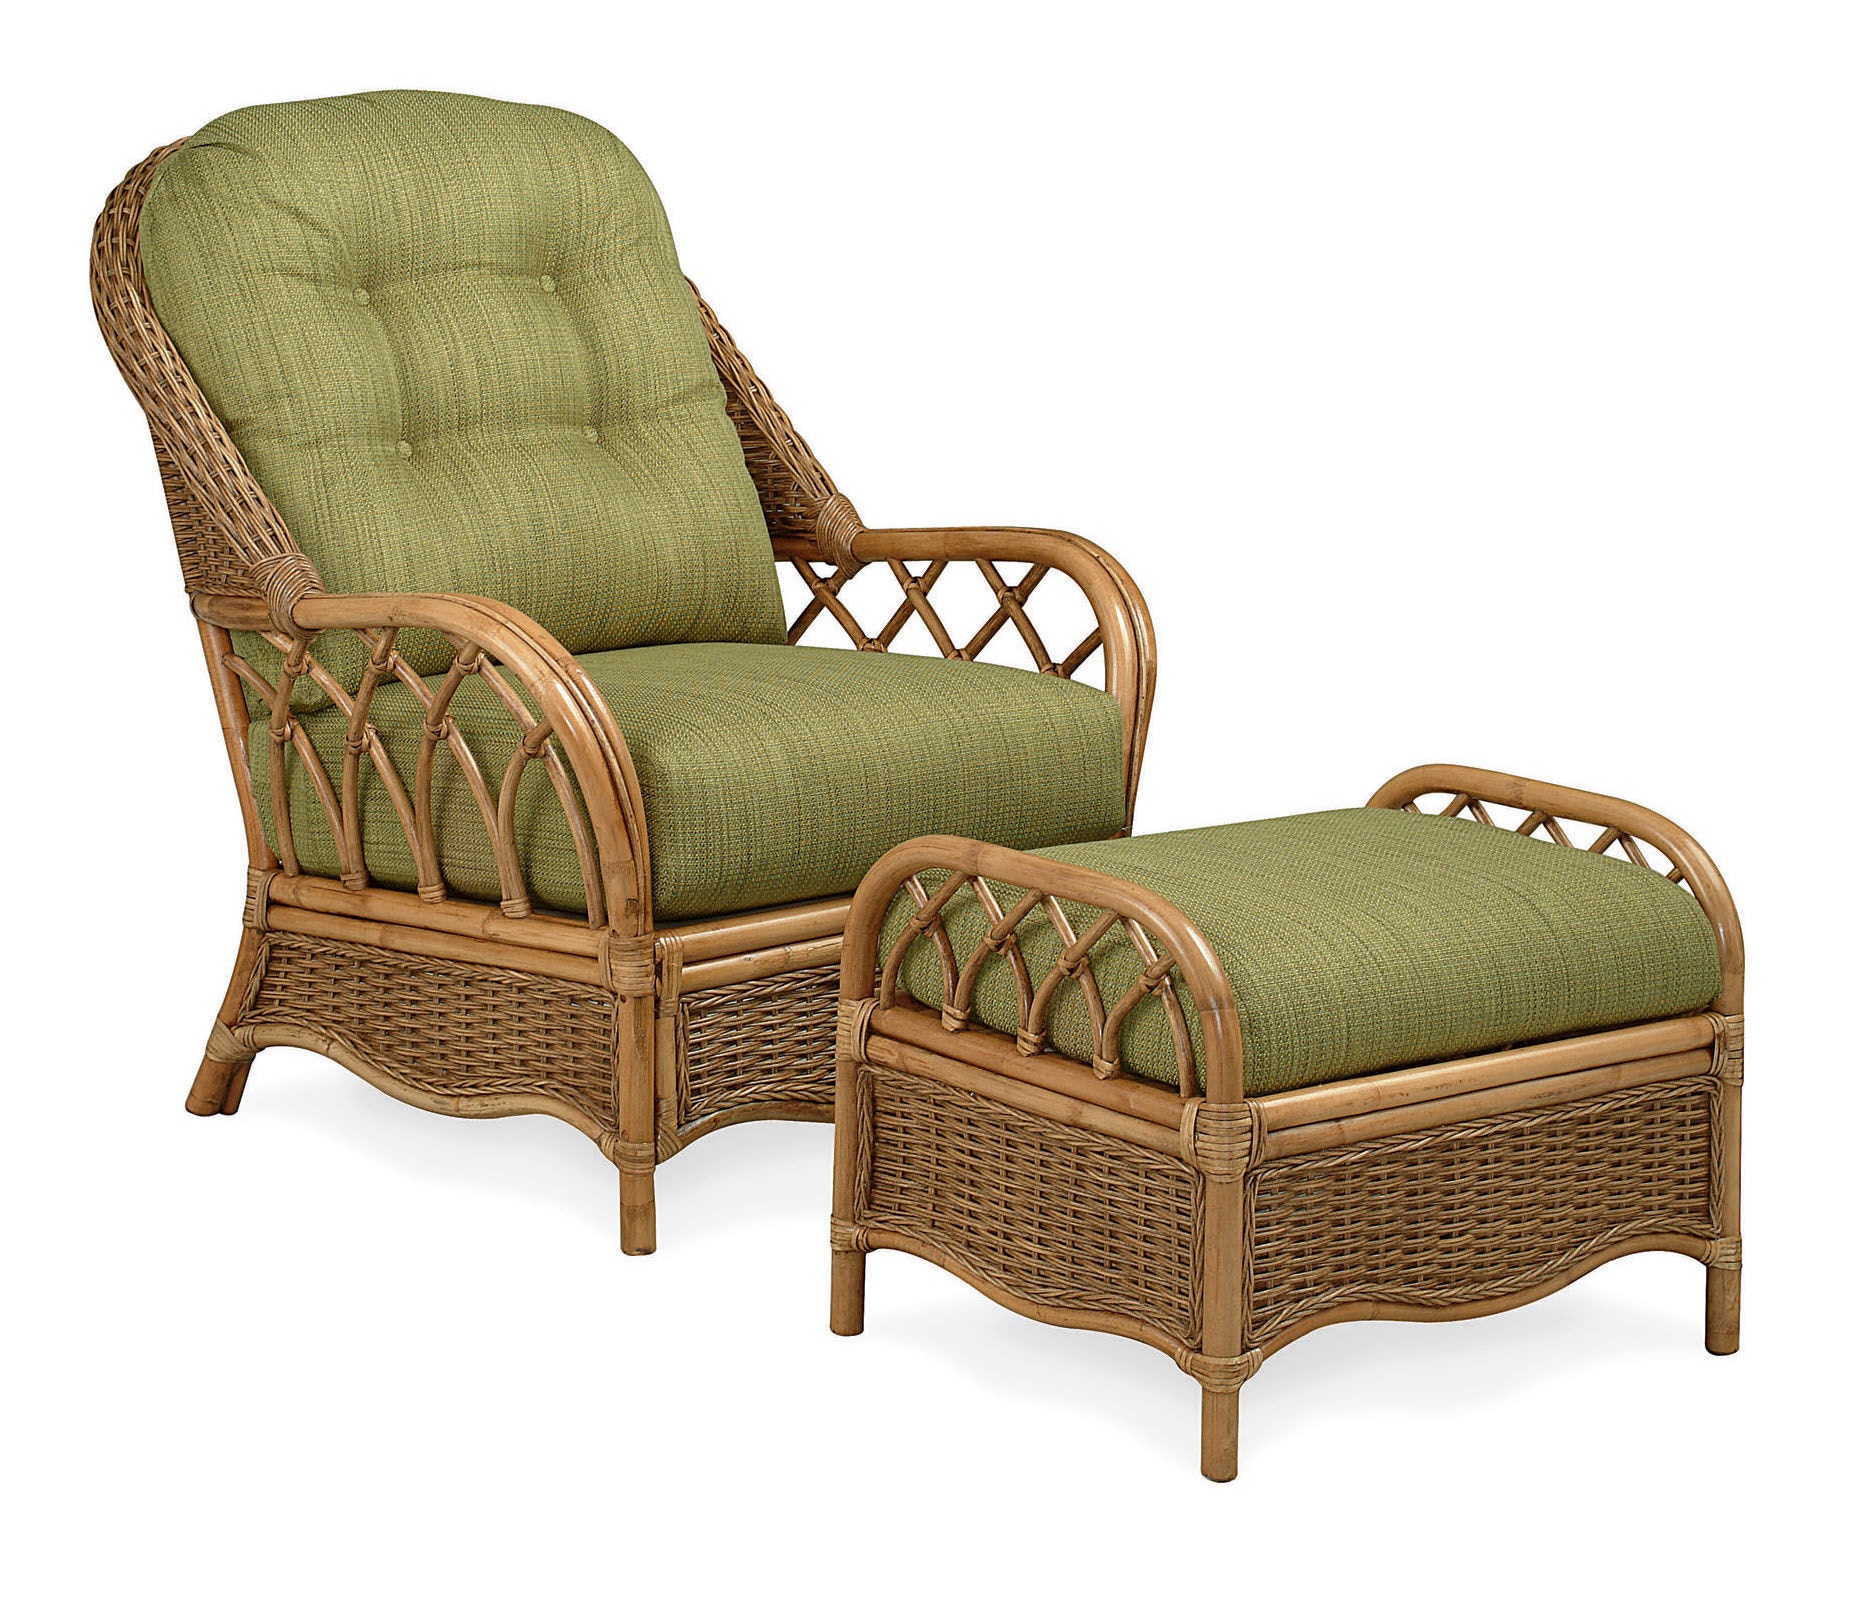 Details about   Vintage Wicker Rattan Chairs 